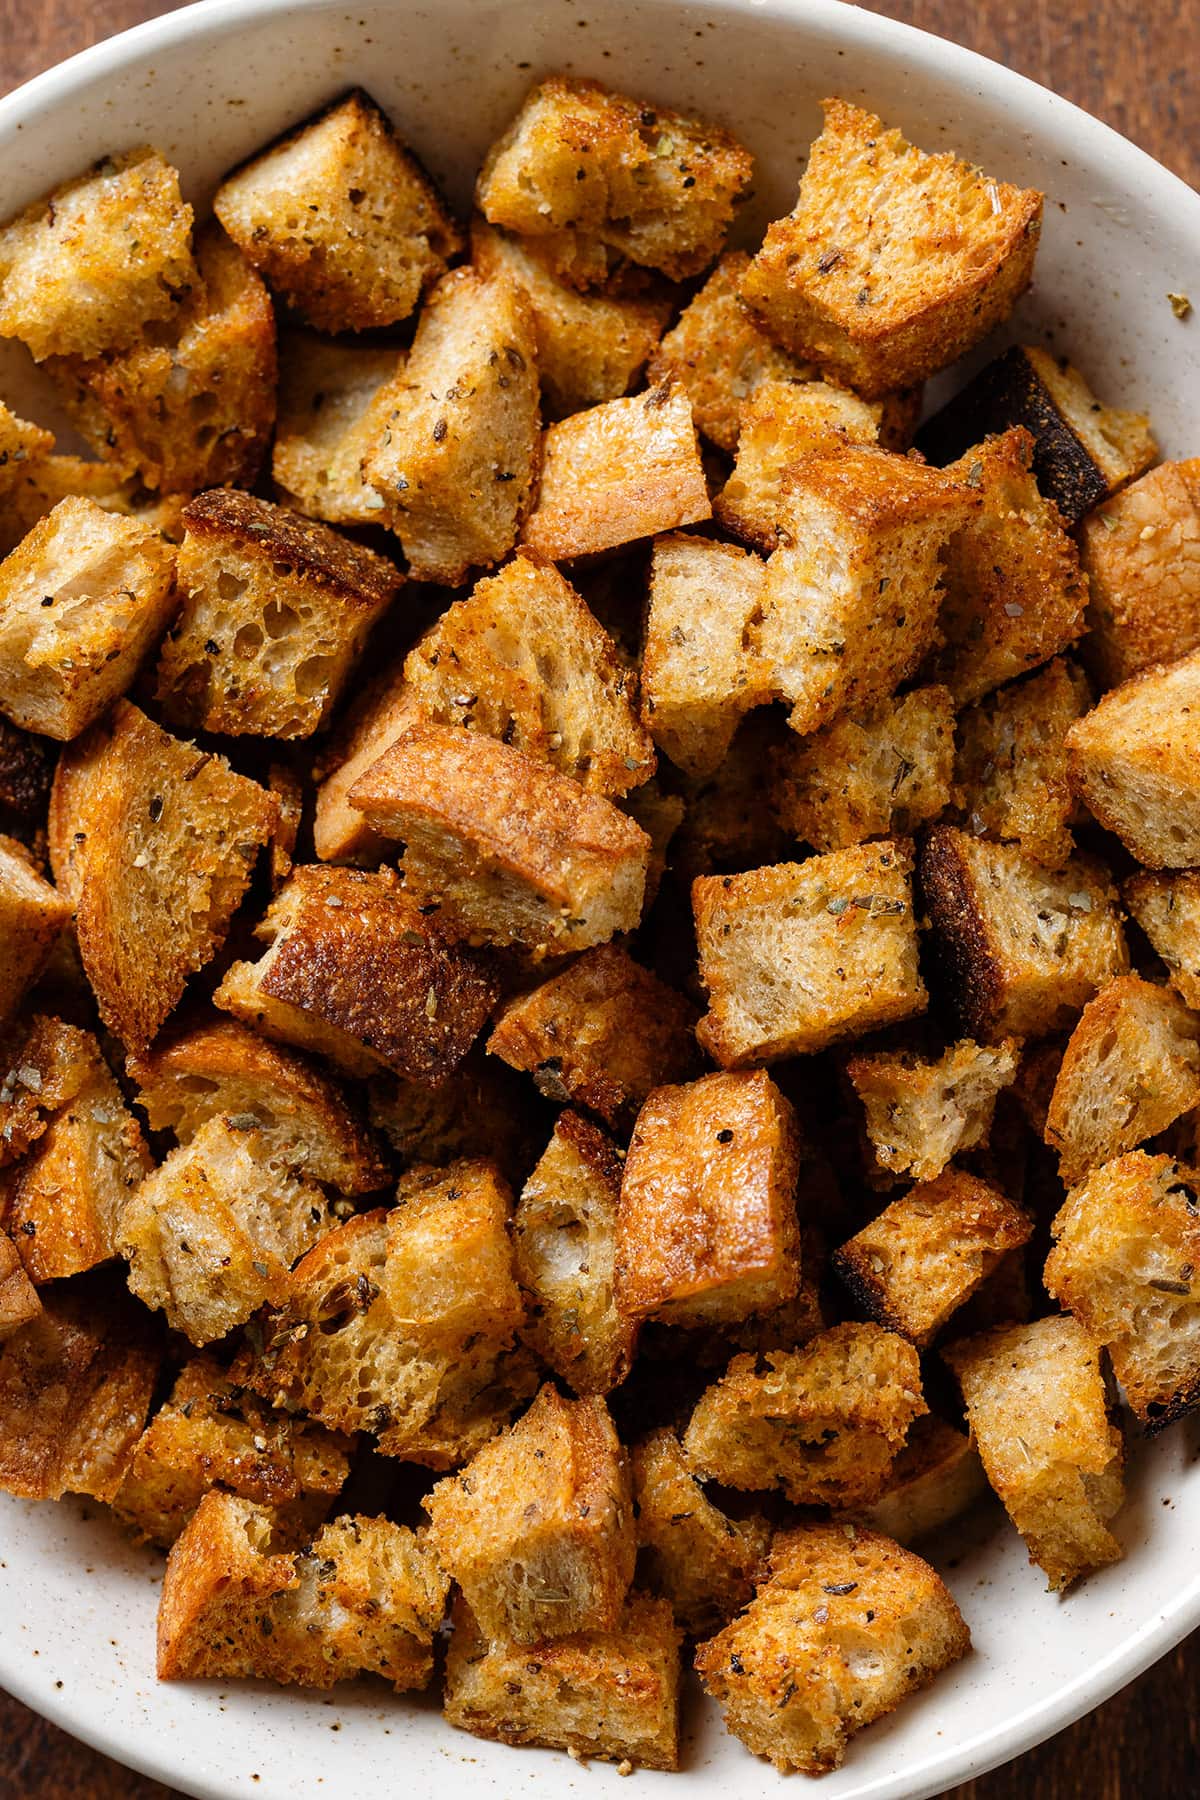 Golden brown sourdough croutons in a white bowl on a wooden background.